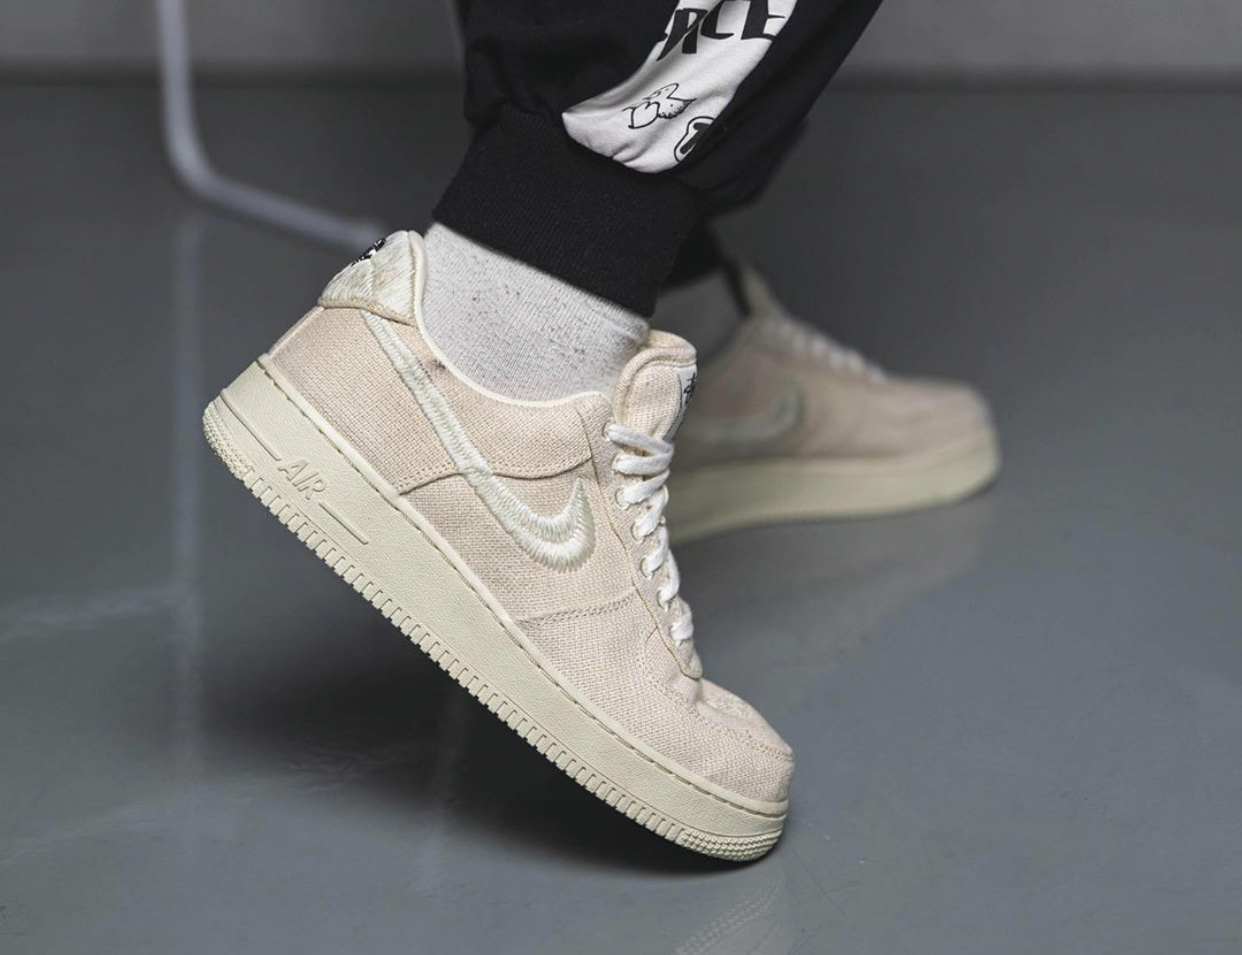 stussy air force 1 fossil